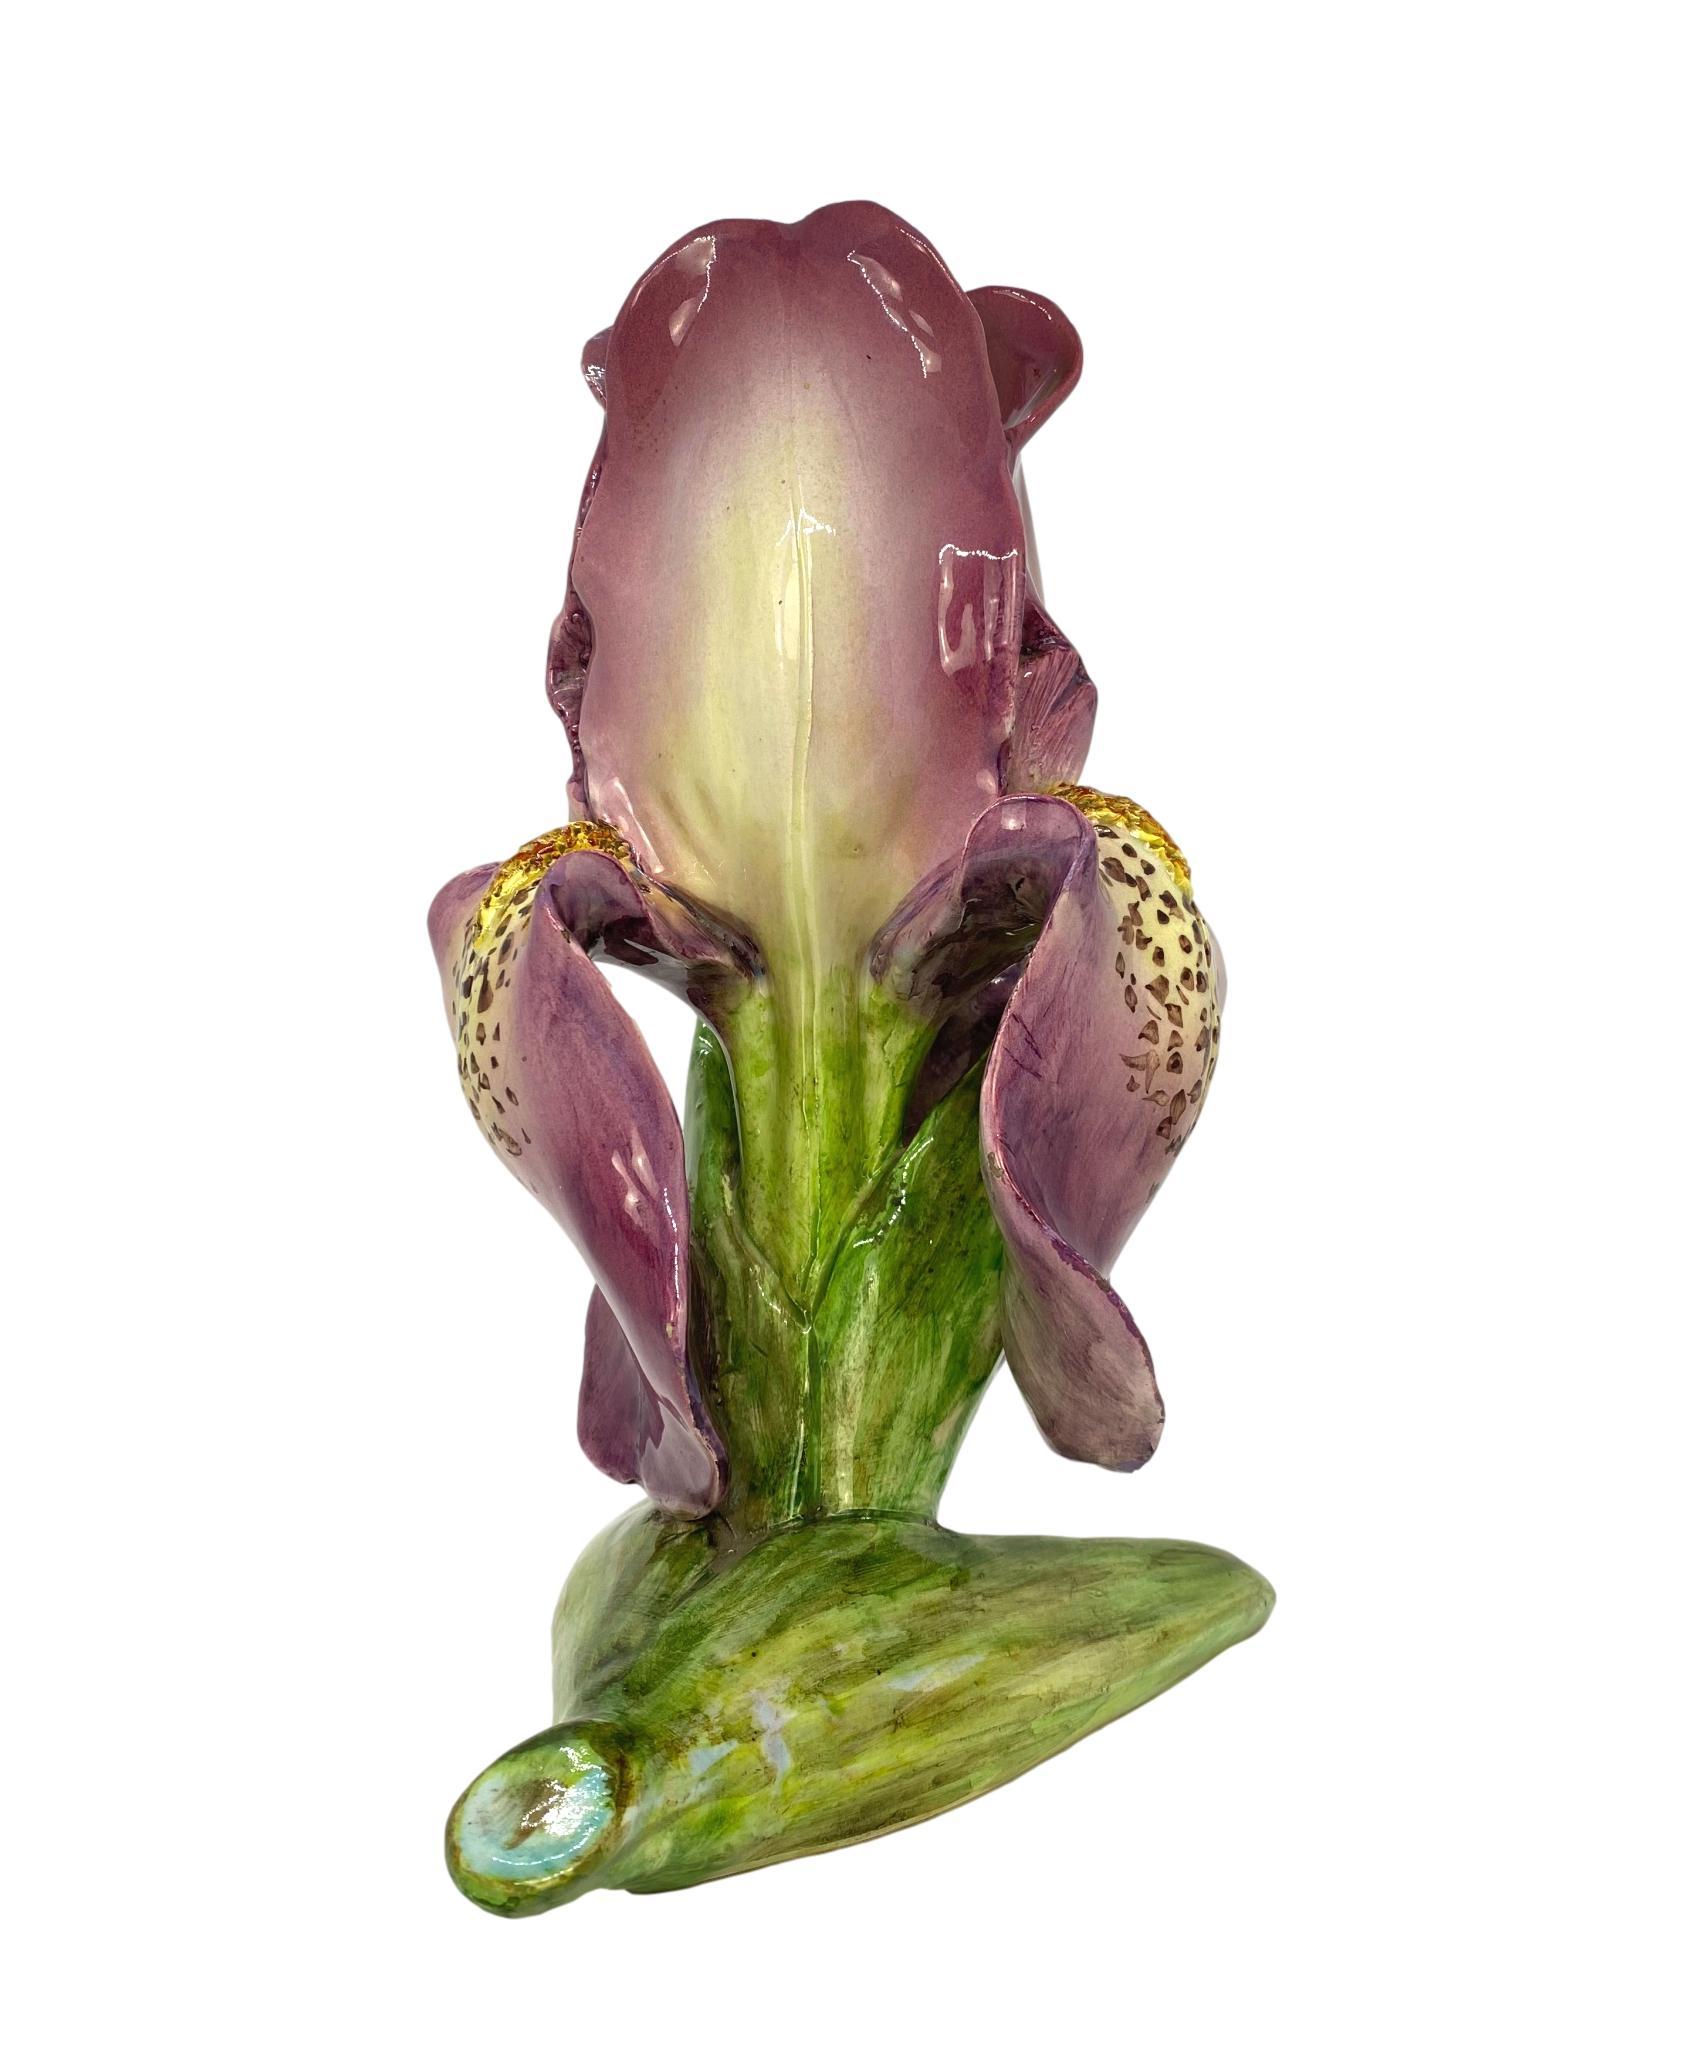 French Majolica (Barbotine) Iris-Form Vase by Delphin Massier, circa 1870, naturalistically modeled as an oversized blooming iris, the lavender petals forming the body, with an open-top, on a stalk-form base glazed in shades of green, singed on